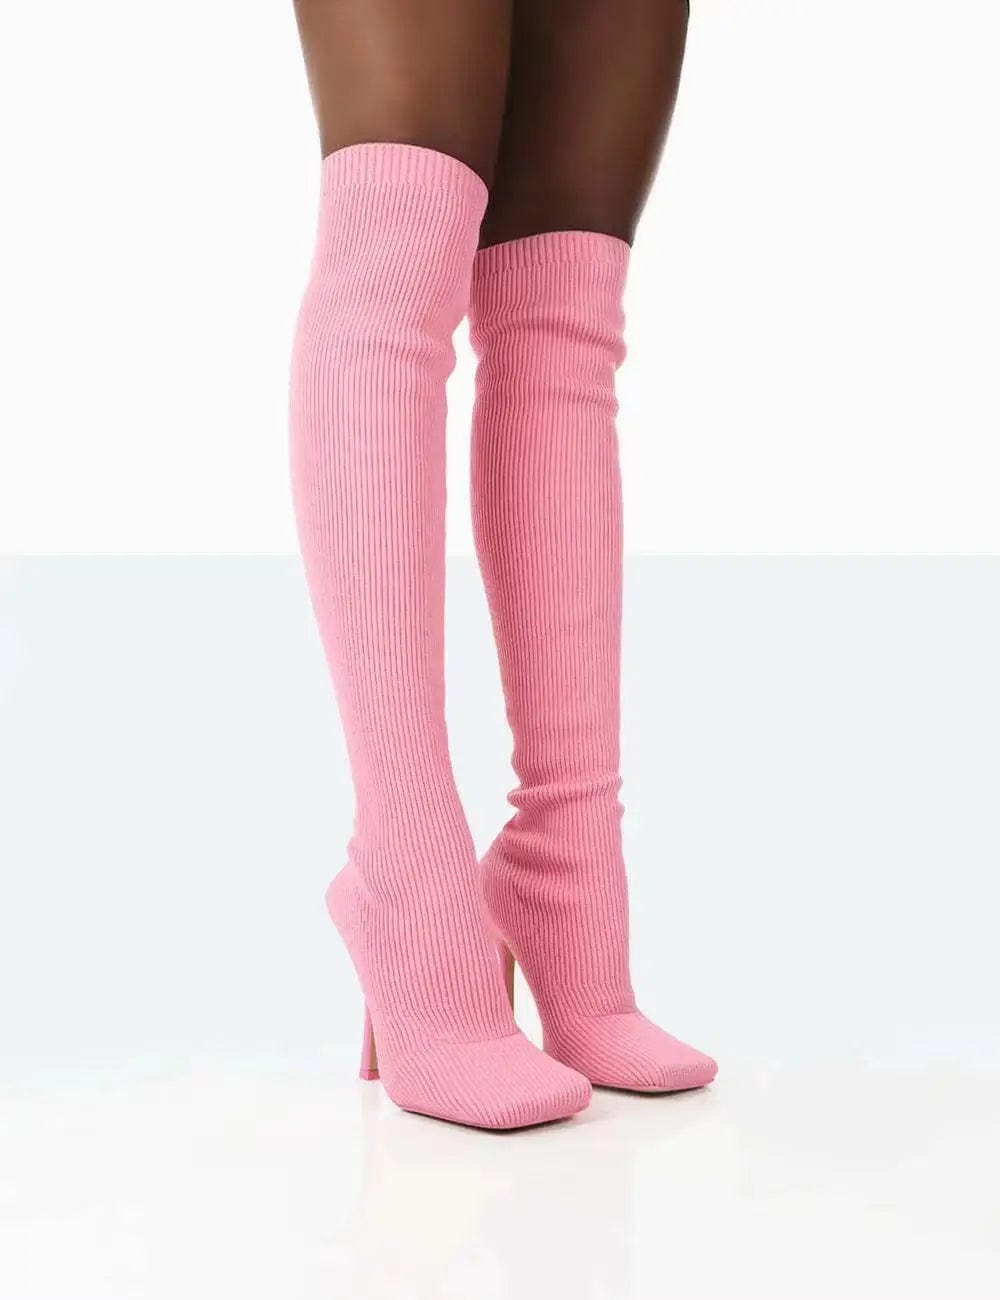 LOVEMI  Bottes Pink / 5 Lovemi -  Thigh High Boots Women Over The Knee Long Boots Fashion Shoes